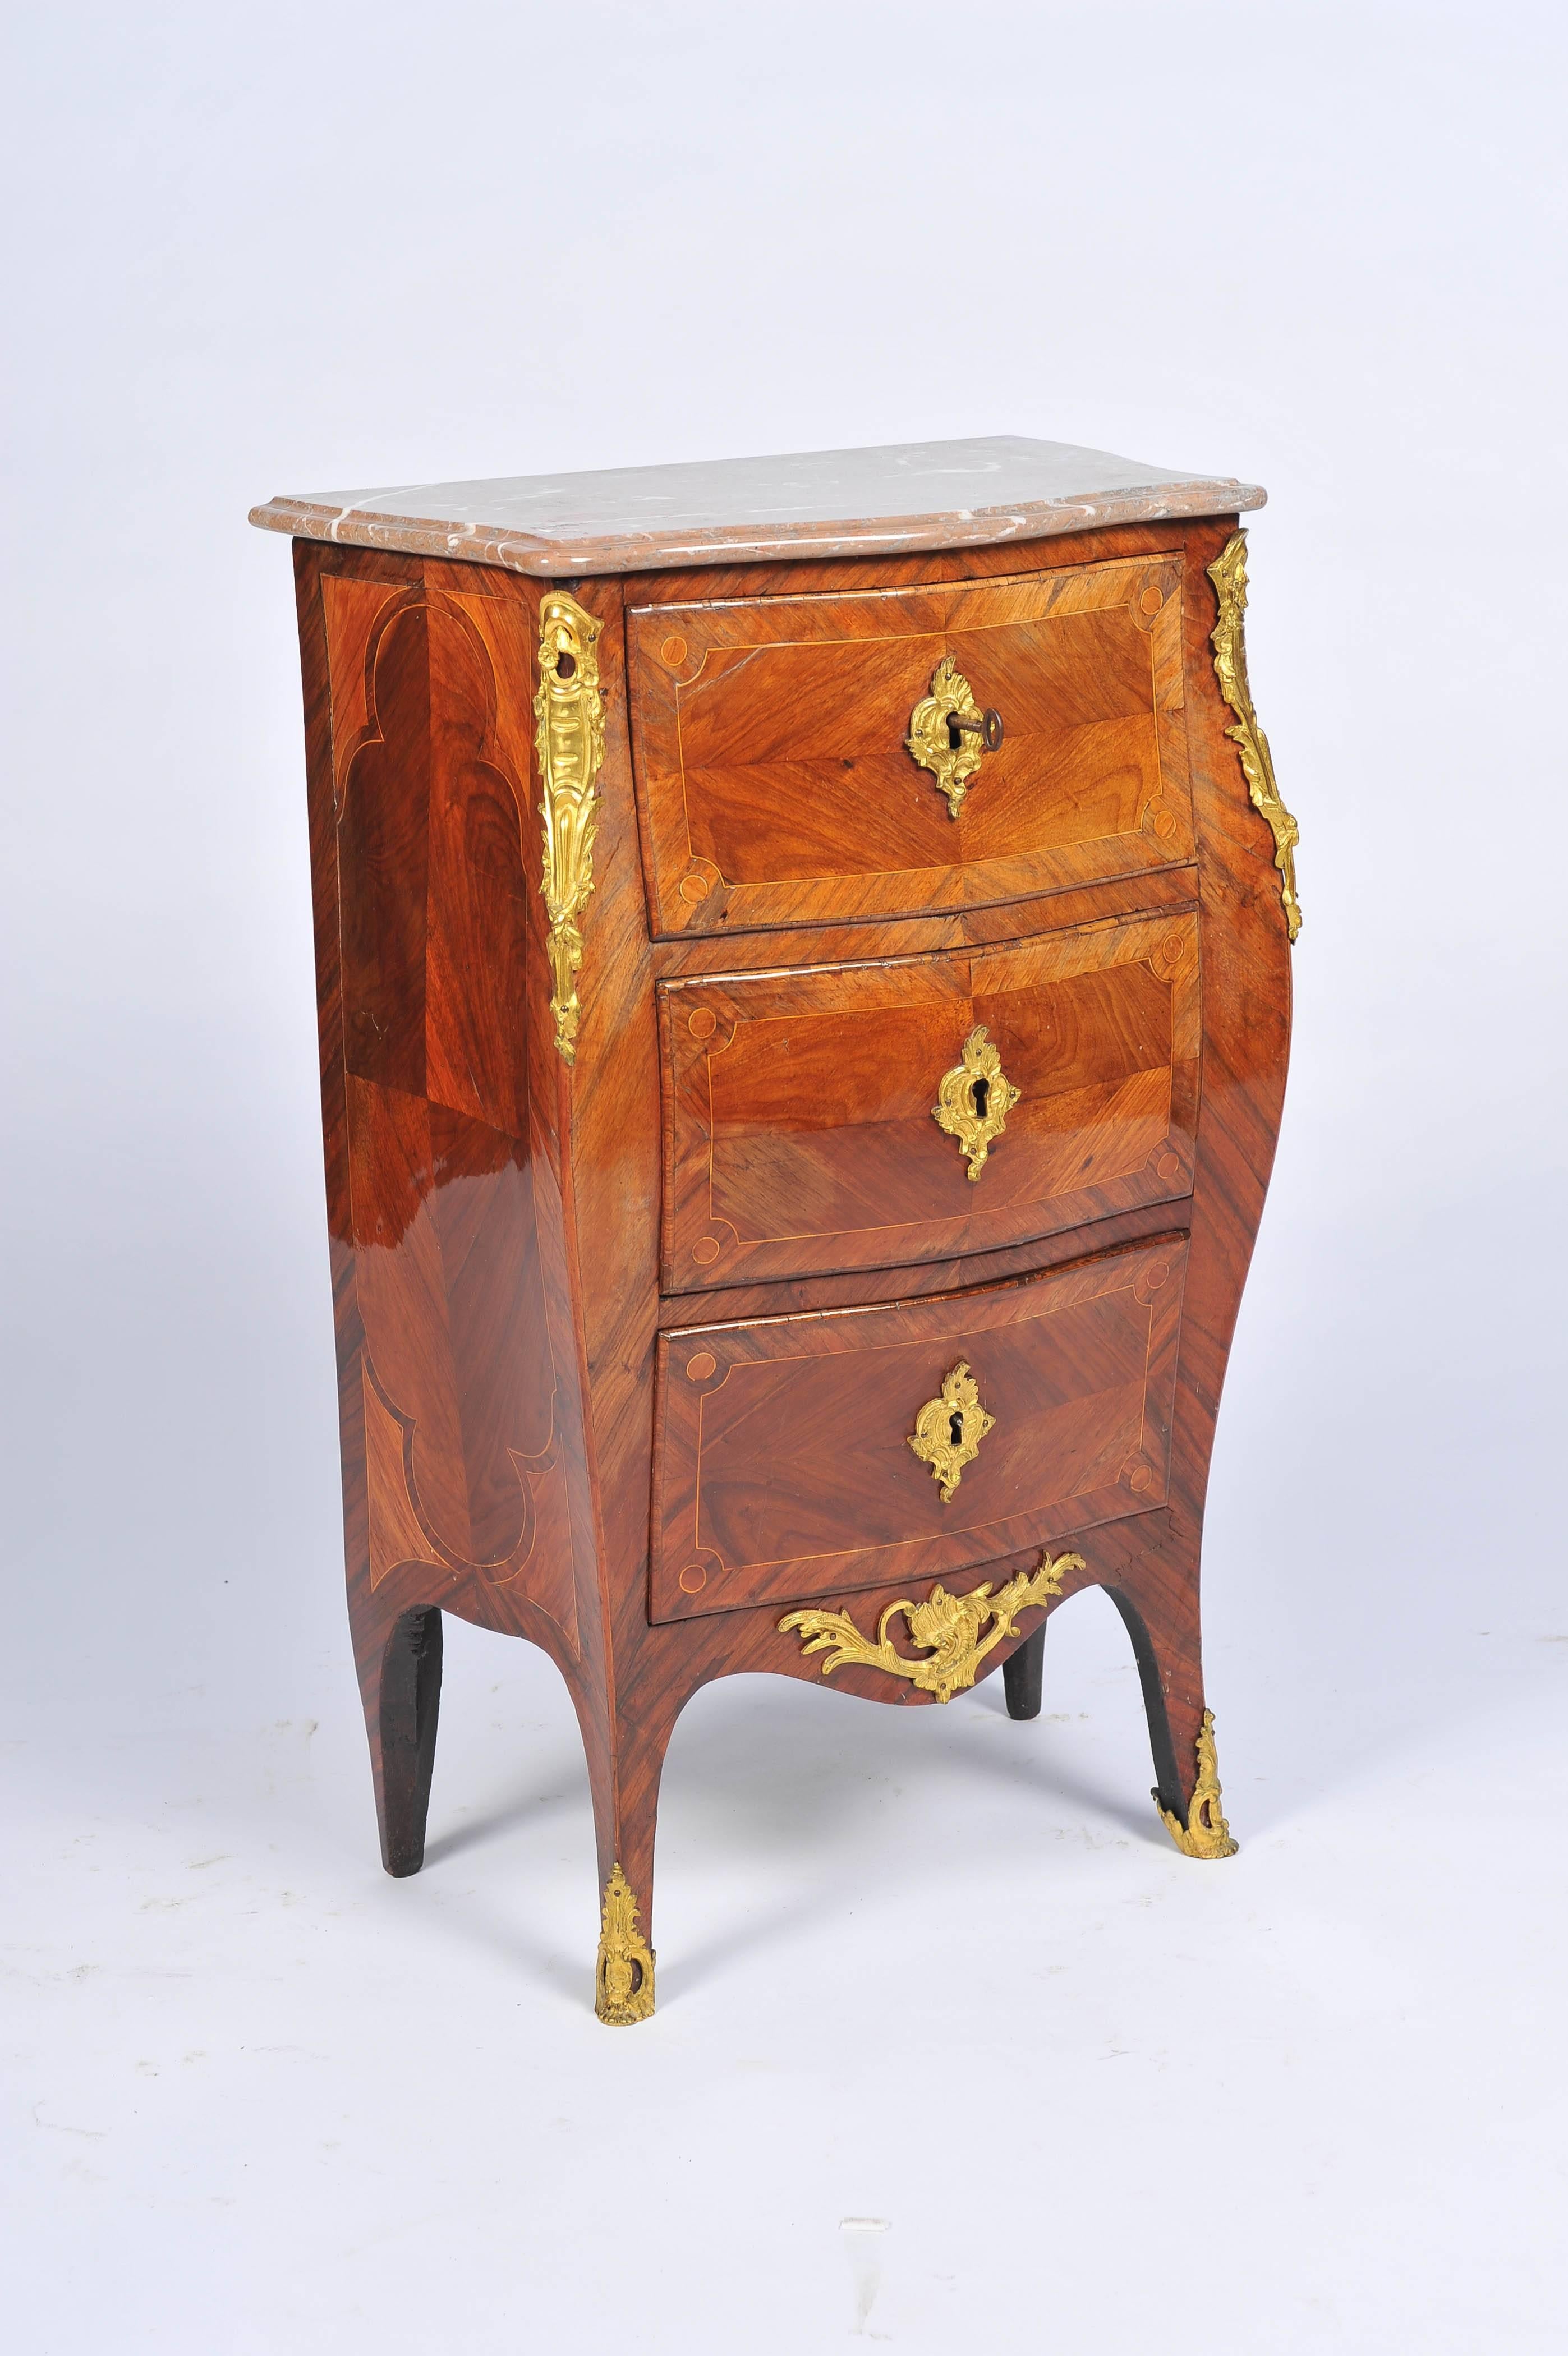 A good quality 18th century Regence period bombe fronted commode. Marble topped, ormolu-mounted, the drawer fronts having quartered veneers and crossbanded, raised on out swept legs, terminating in ormolu feet.
Maker's name stamp under marble is